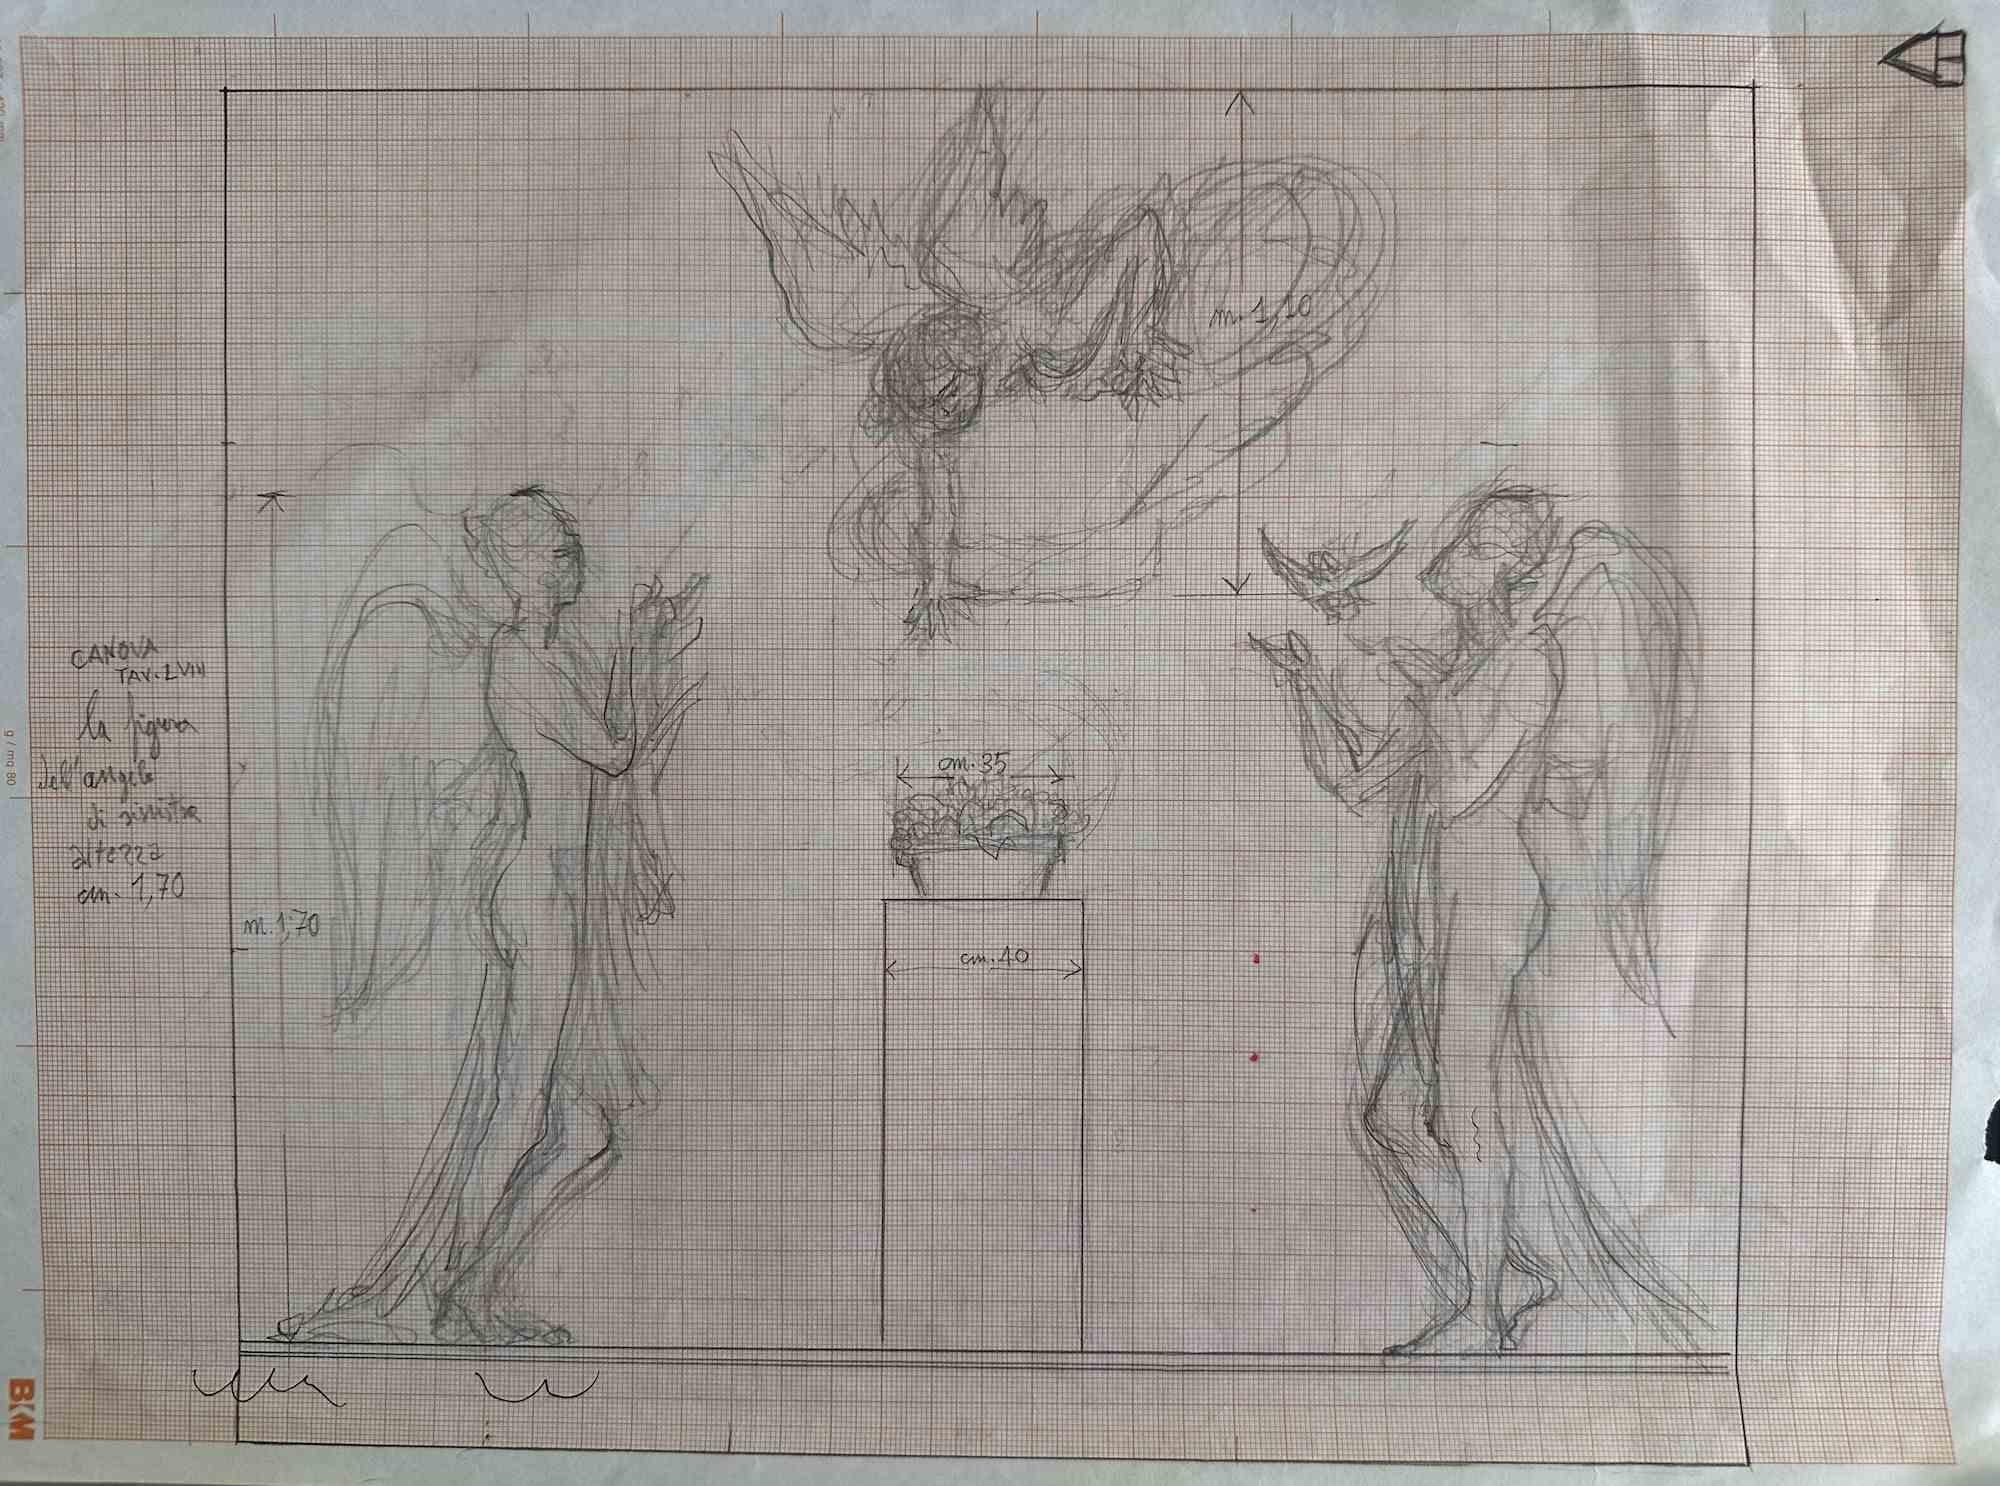 Angels of Canova is a pencil drawing on paper realized by an anonymous artist in the mid-20th century.

Good conditions with slight folding.